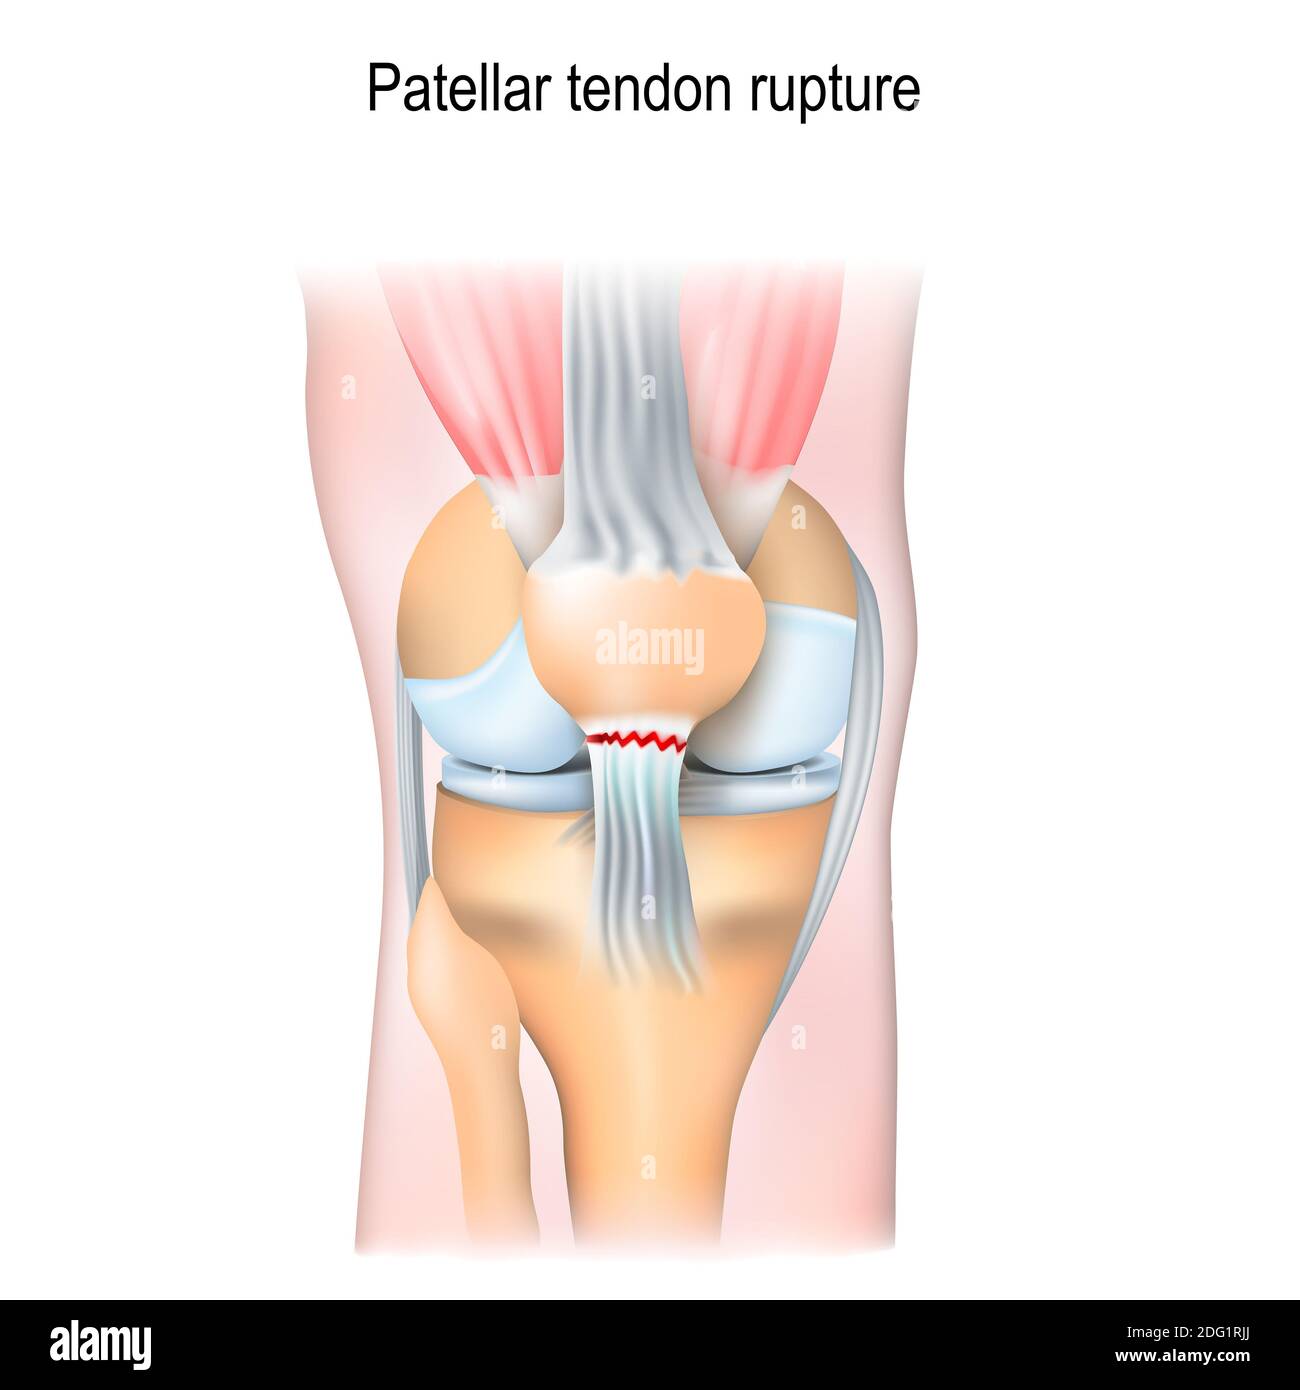 Patellar tendon rupture. Knee joint with patella and Tendon Tears. Stock Photo